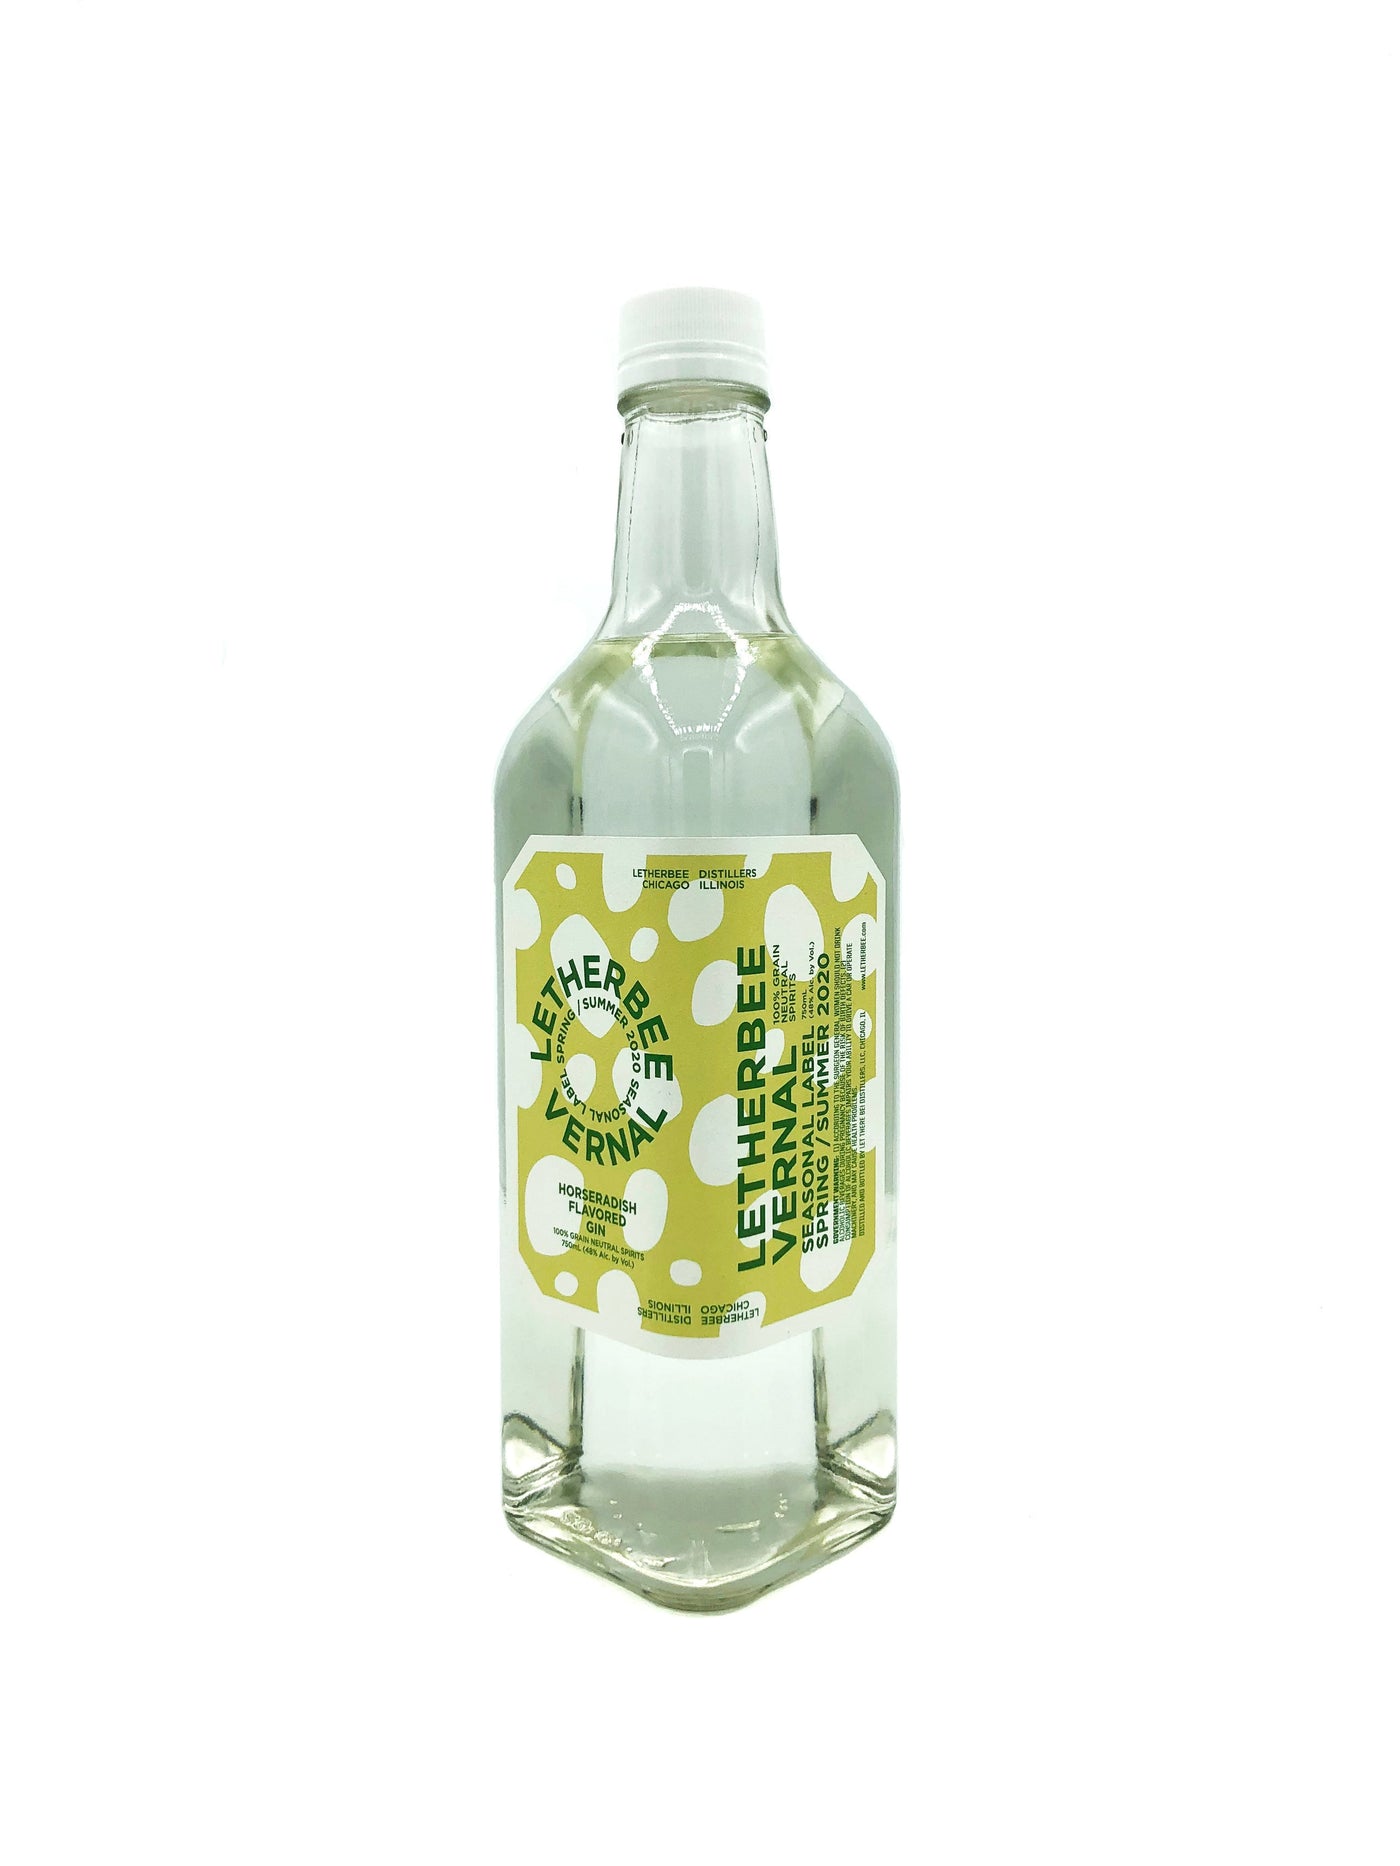 Letherbee Vernal Gin